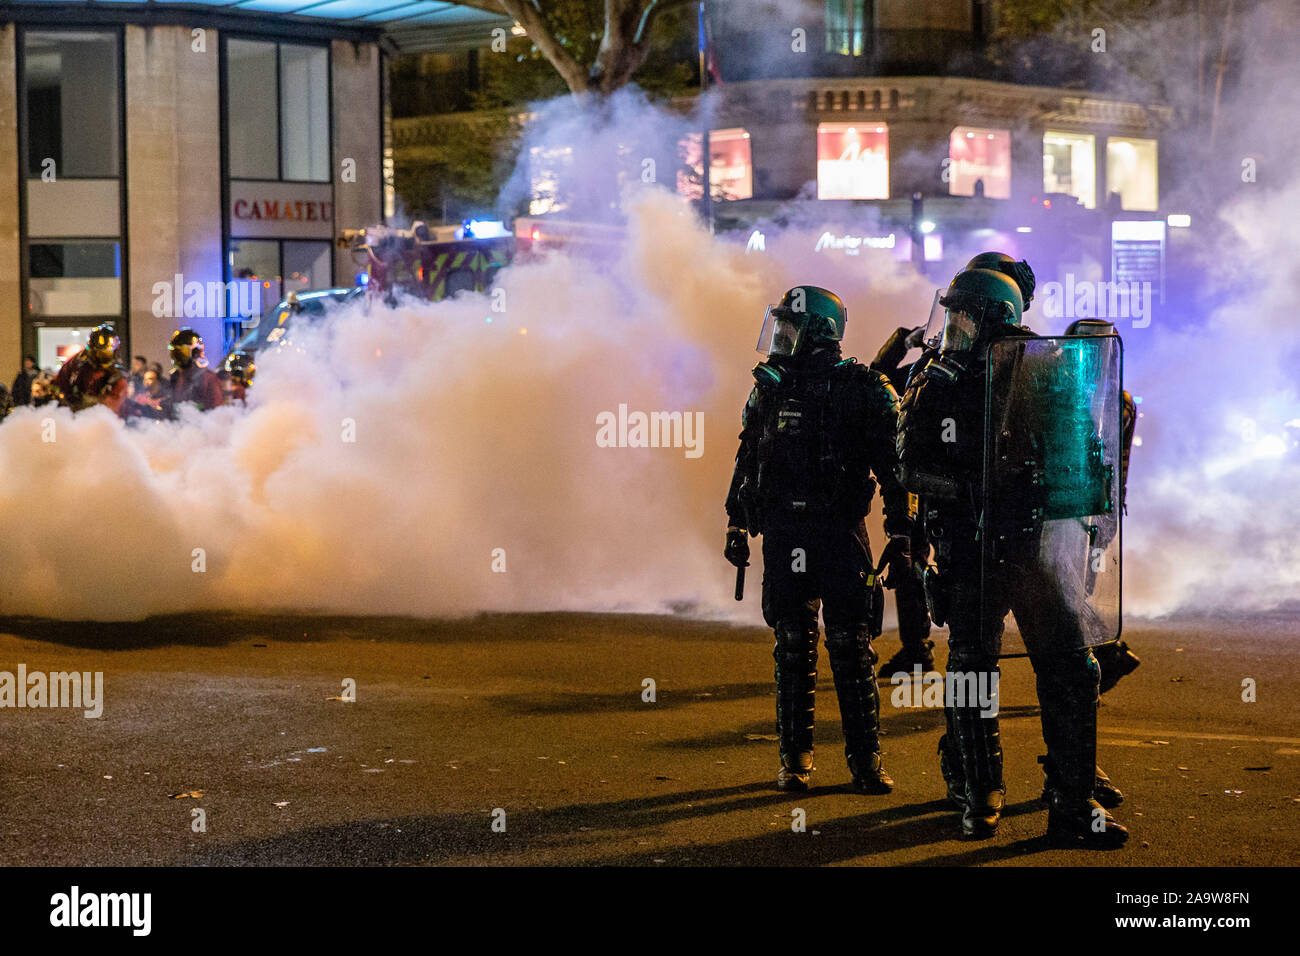 Paris, France. 17th Nov, 2019. French police forces disperse demonstrators during a demonstration to mark the first anniversary of the Yellow Vests movement in Paris, France, on Nov. 17, 2019. On Nov. 17, 2018, the movement, which got its name from the high visibility vests drivers keep in their cars, started as a campaign against an increase in diesel's price, most commonly used car fuel in France, that Macron said is necessary to combat climate change. Credit: Aurelien Morissard/Xinhua/Alamy Live News Stock Photo